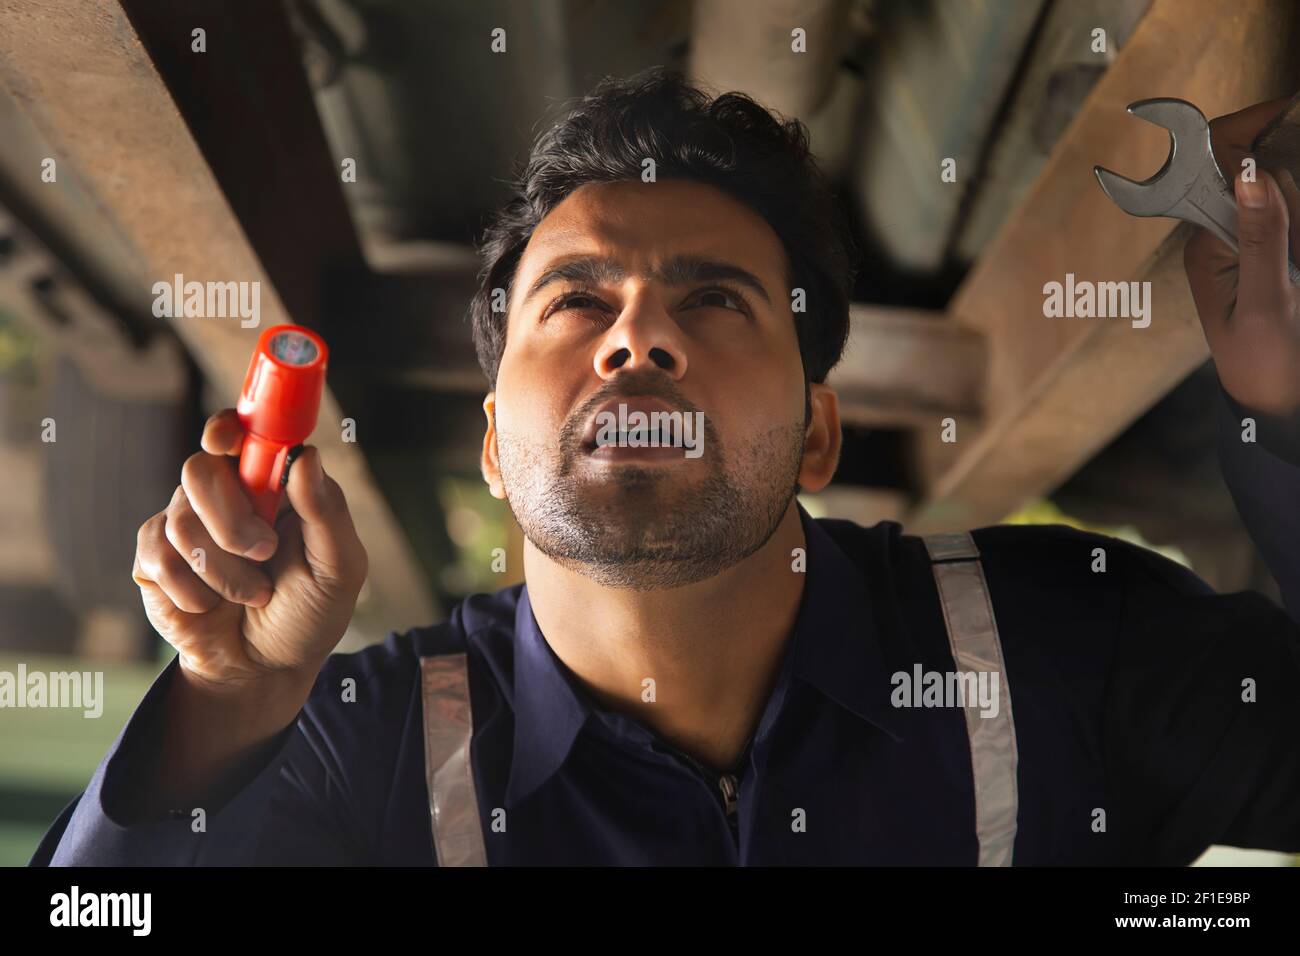 Mechanic checking the lower part of the car Stock Photo